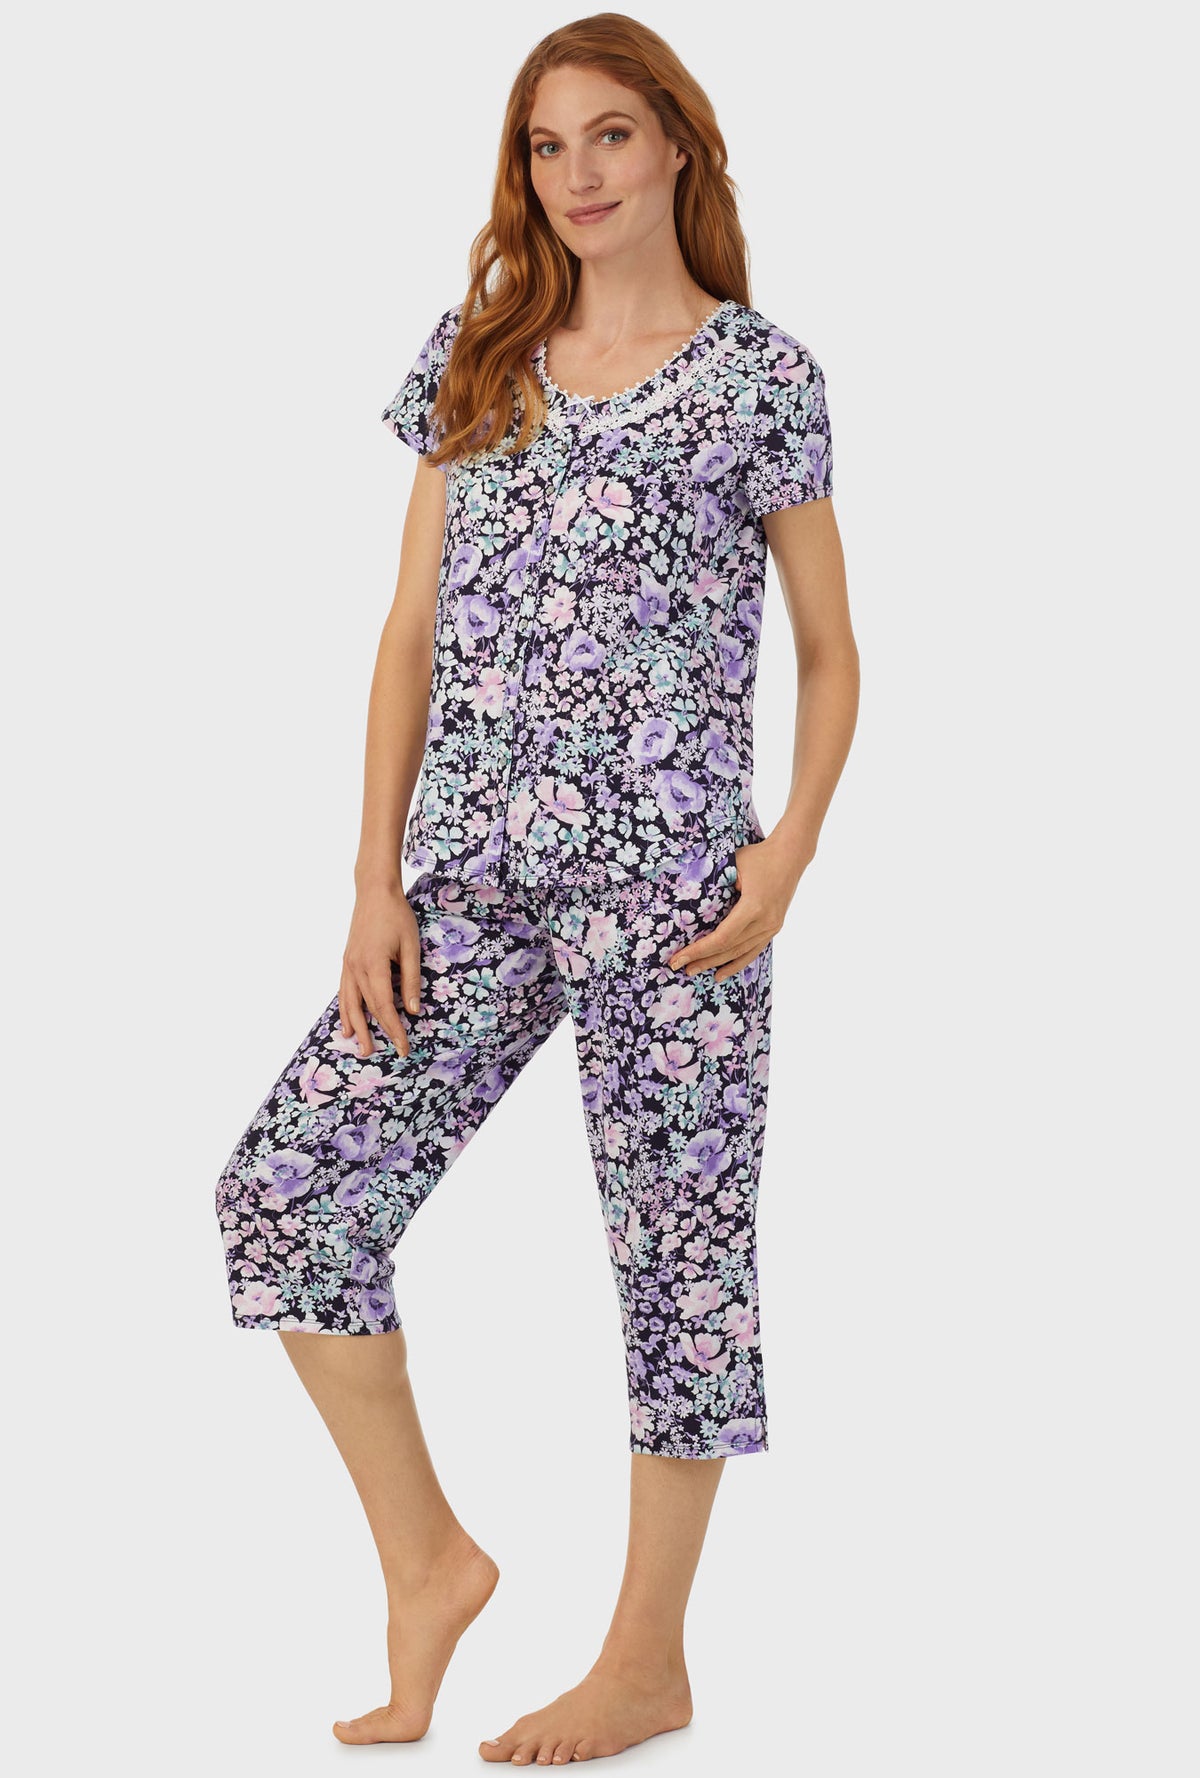 A lady wearing navy short sleeve capri pant pj set  with midnight blue floral print.